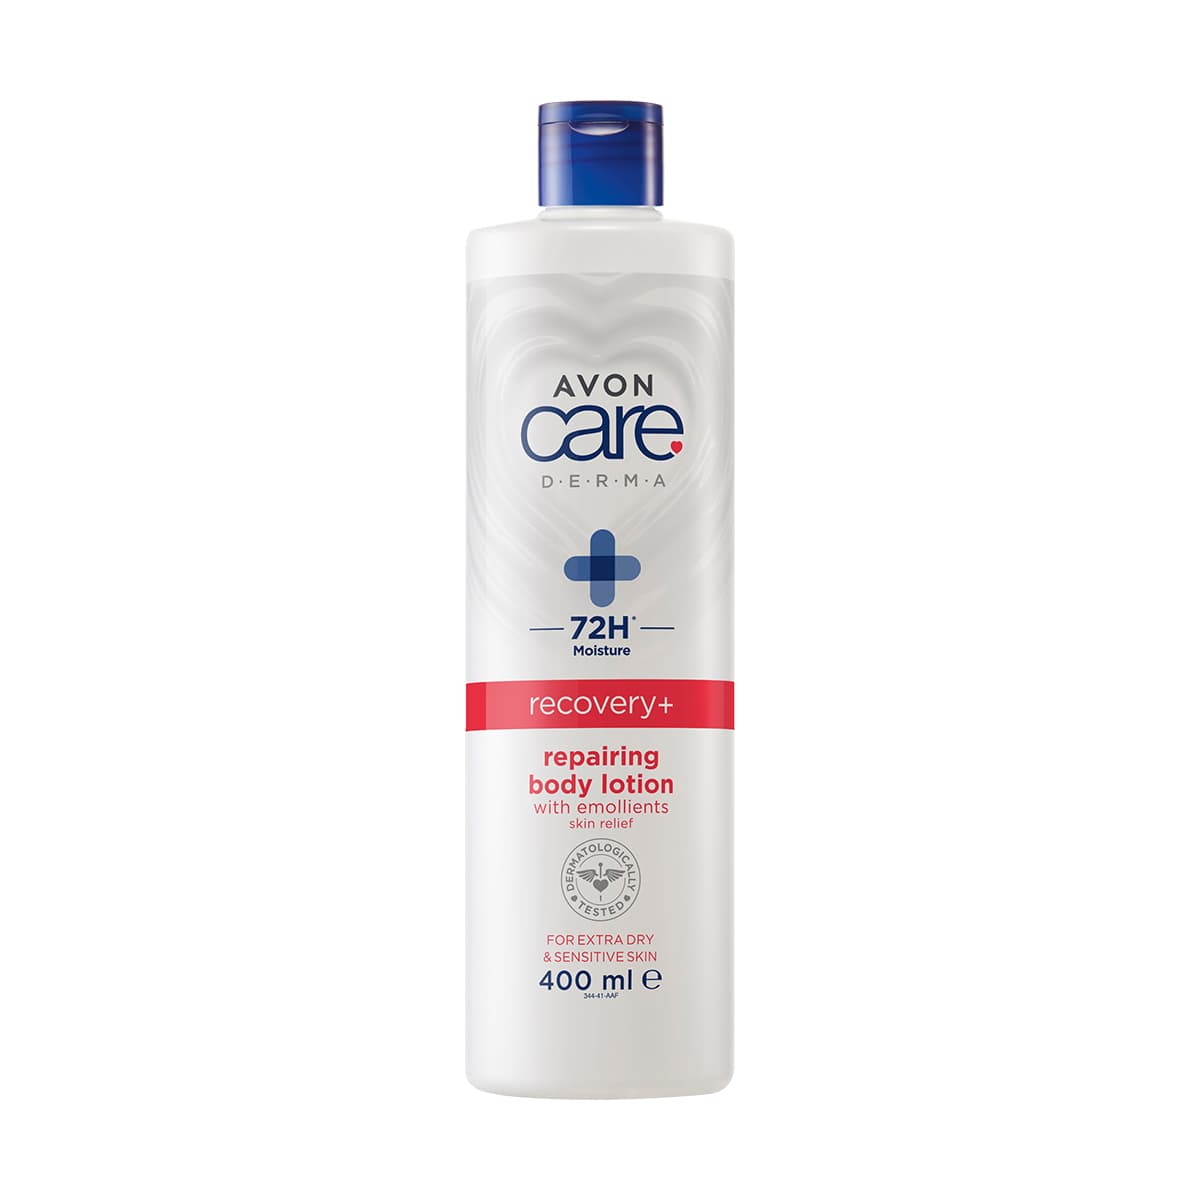 Avon Care Derma Recovery+ Body Lotion 400ml